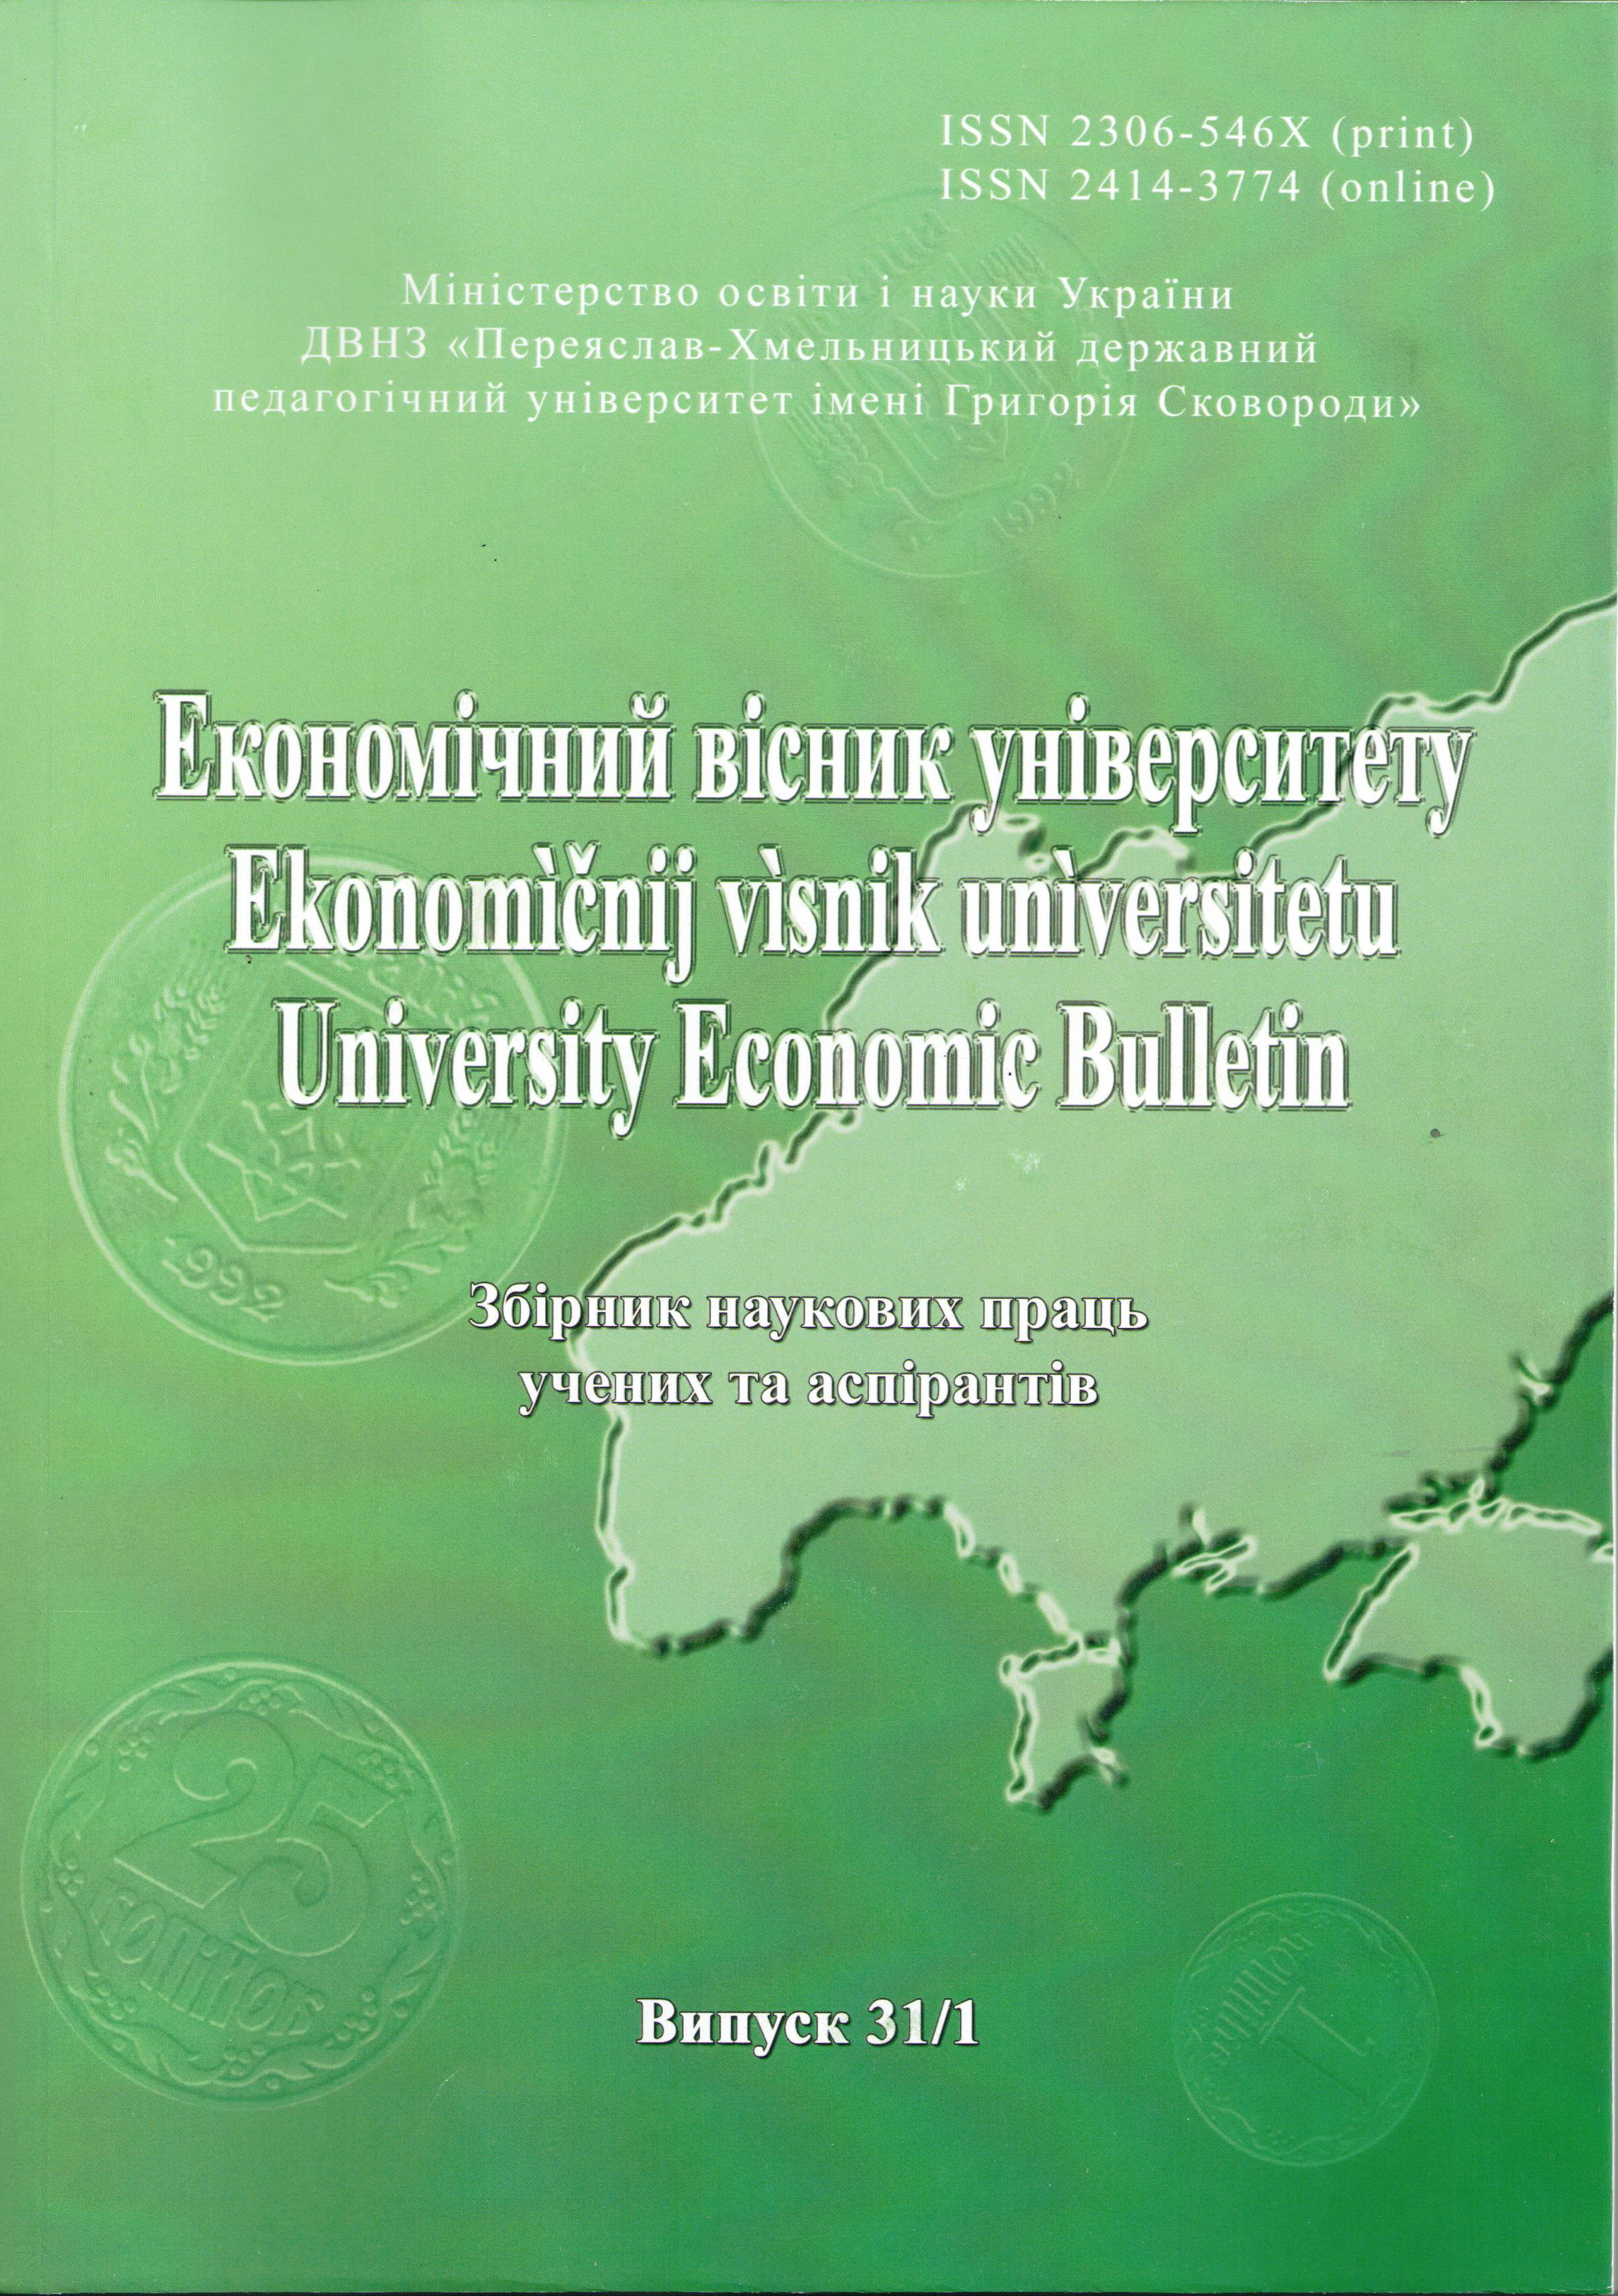 Ukraine in the footsteps of Bulgaria – the socio-economic analysis and forecast Cover Image